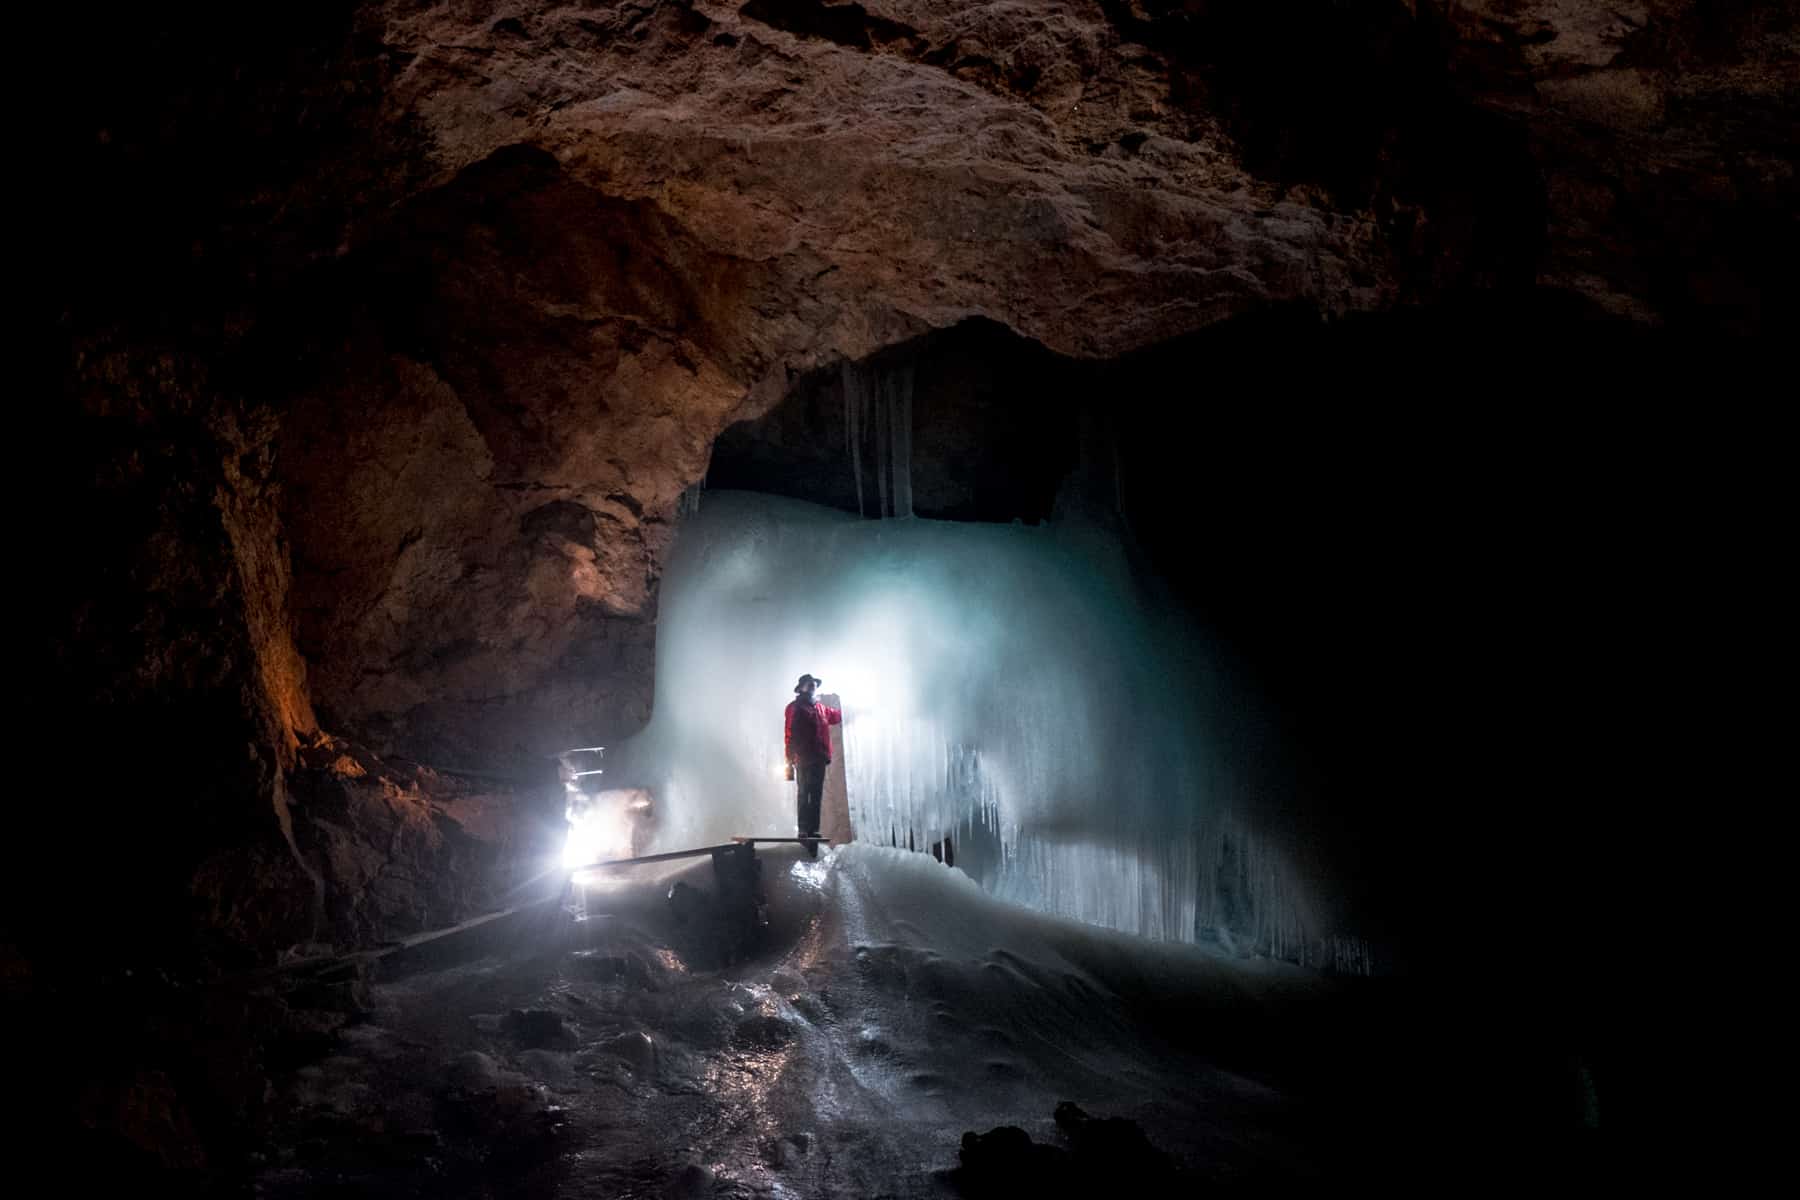 A guide in a red coat stands in front of a boxed shaped sheet of blue illuminated ice in the ice cave Eisriesenwelt in Salzburg, Austria